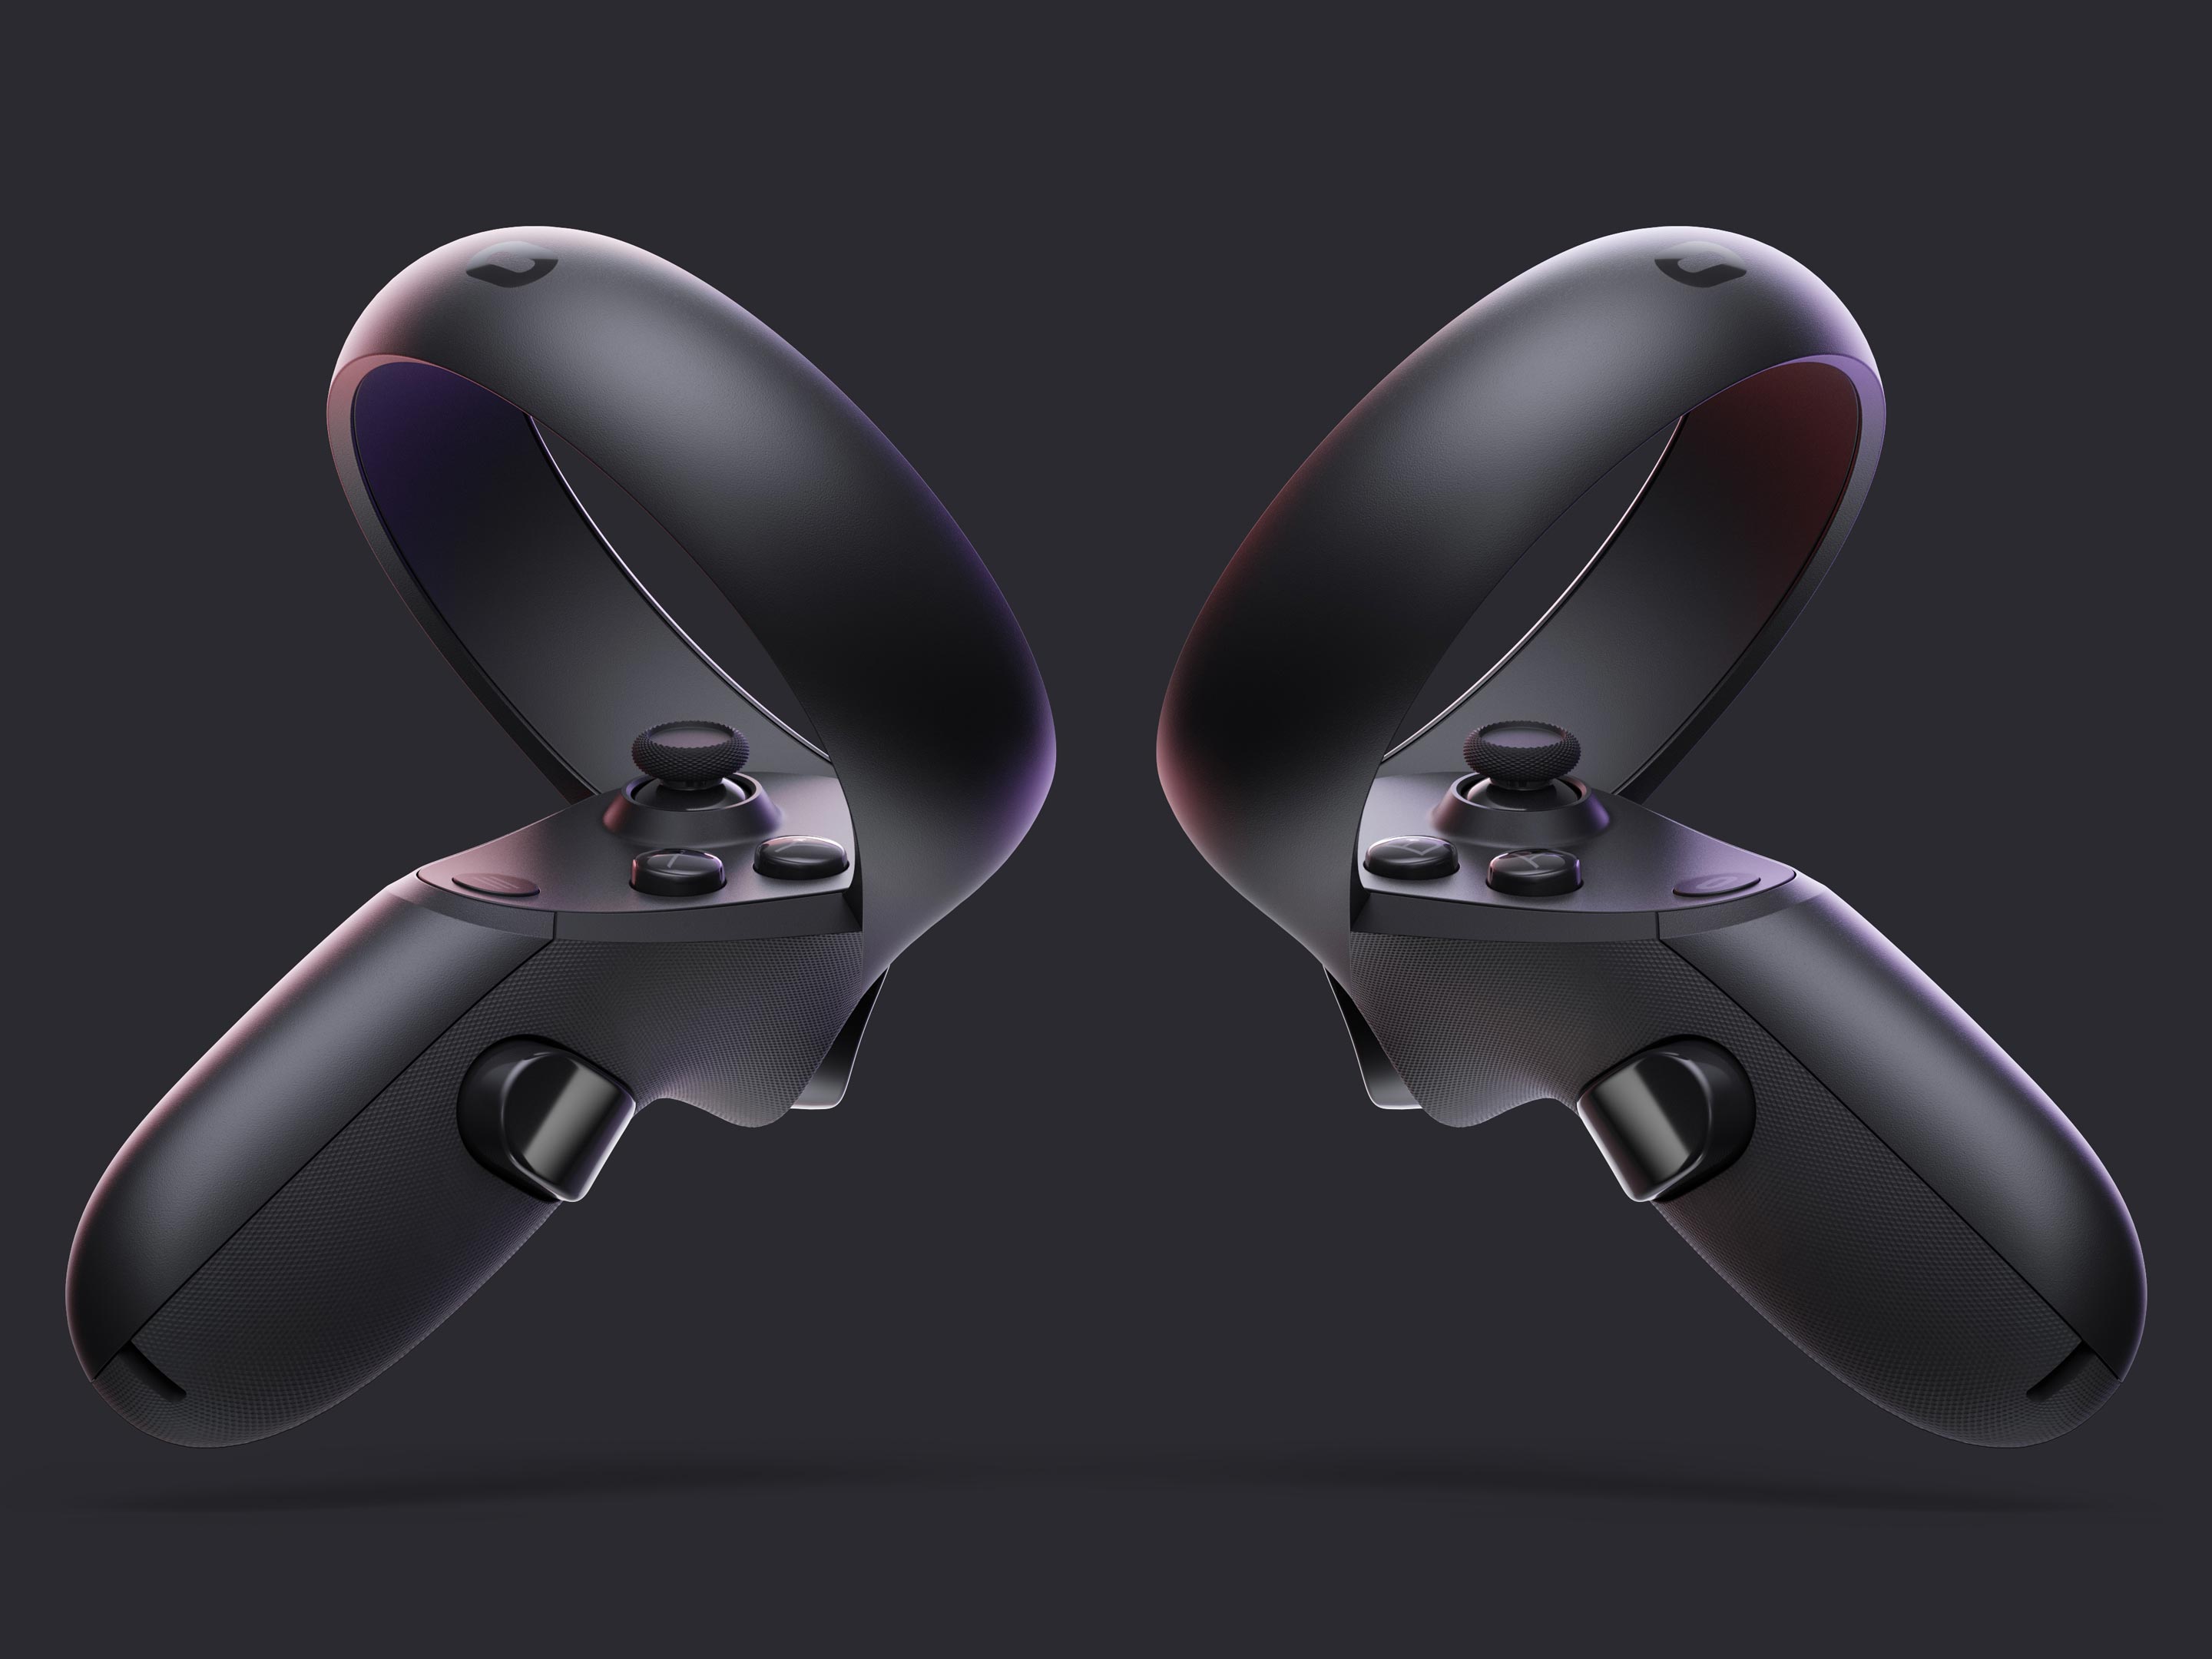 Oculus Quest Touch controllers